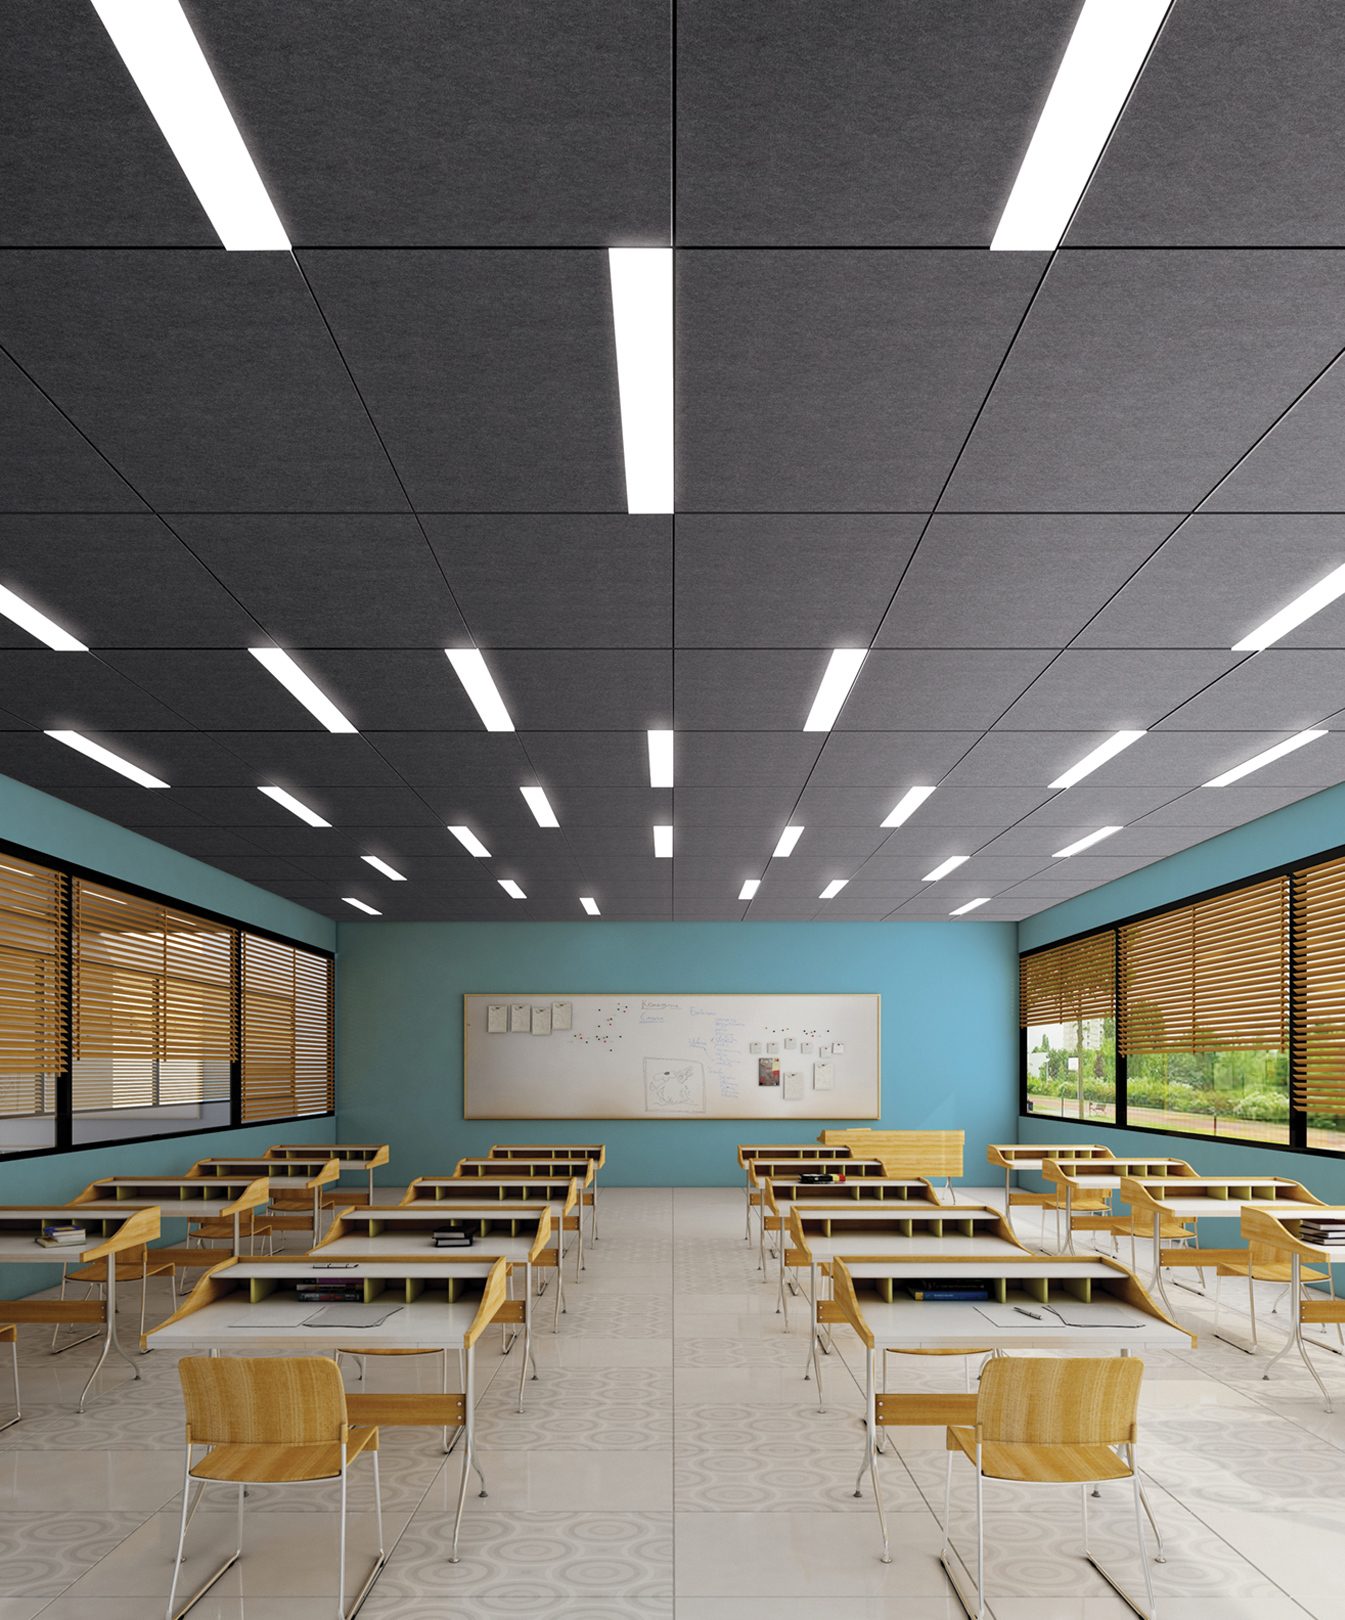 Interior design of a turquoise and light wood classroom with felt ceiling system.